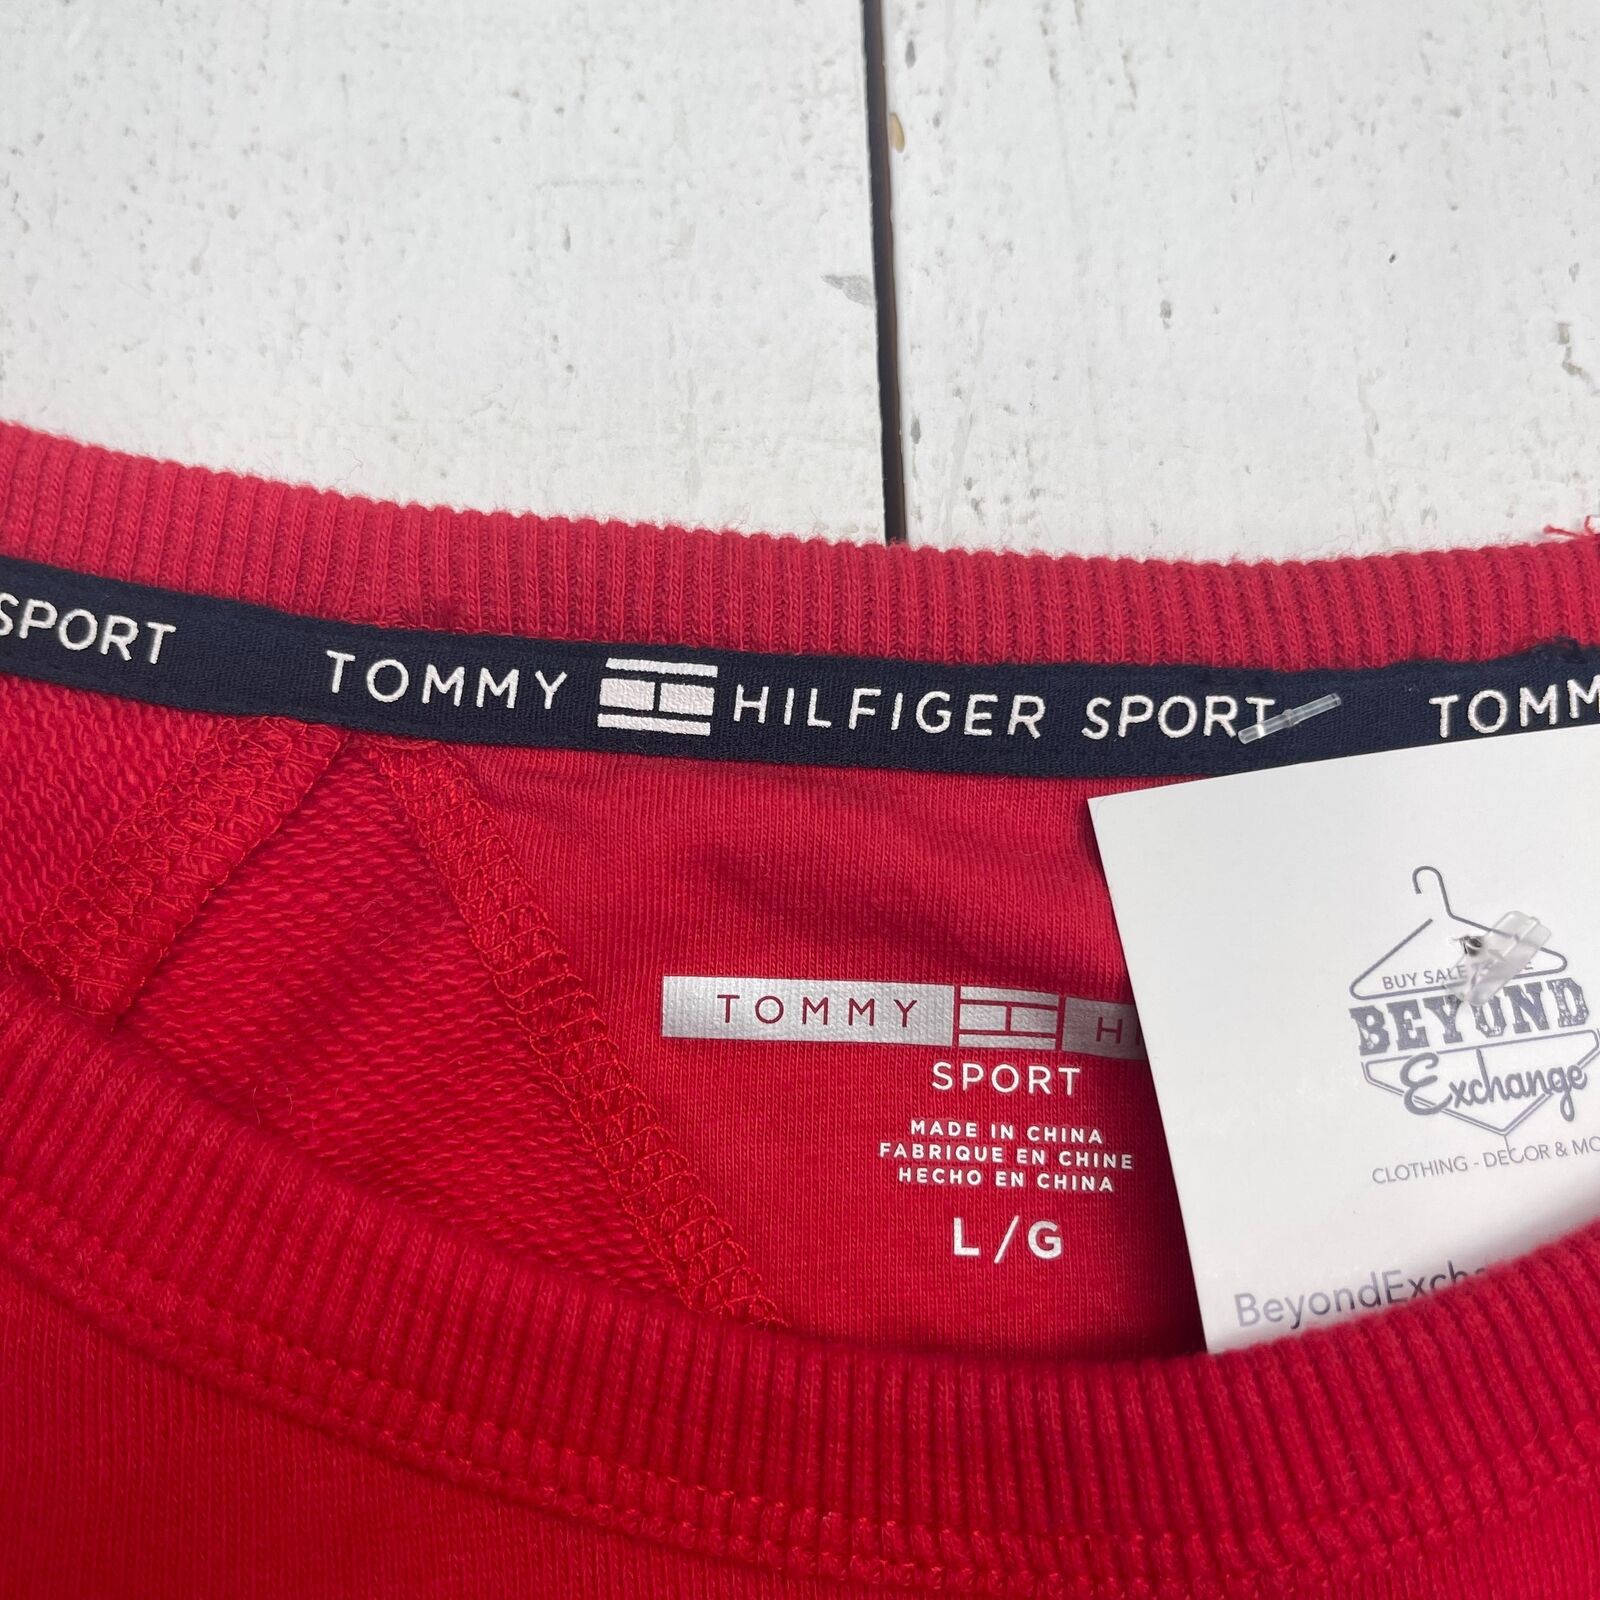 Tommy Hilfiger Sport Red Spellout Long Sleeve Sweater Women's Size Lar -  beyond exchange